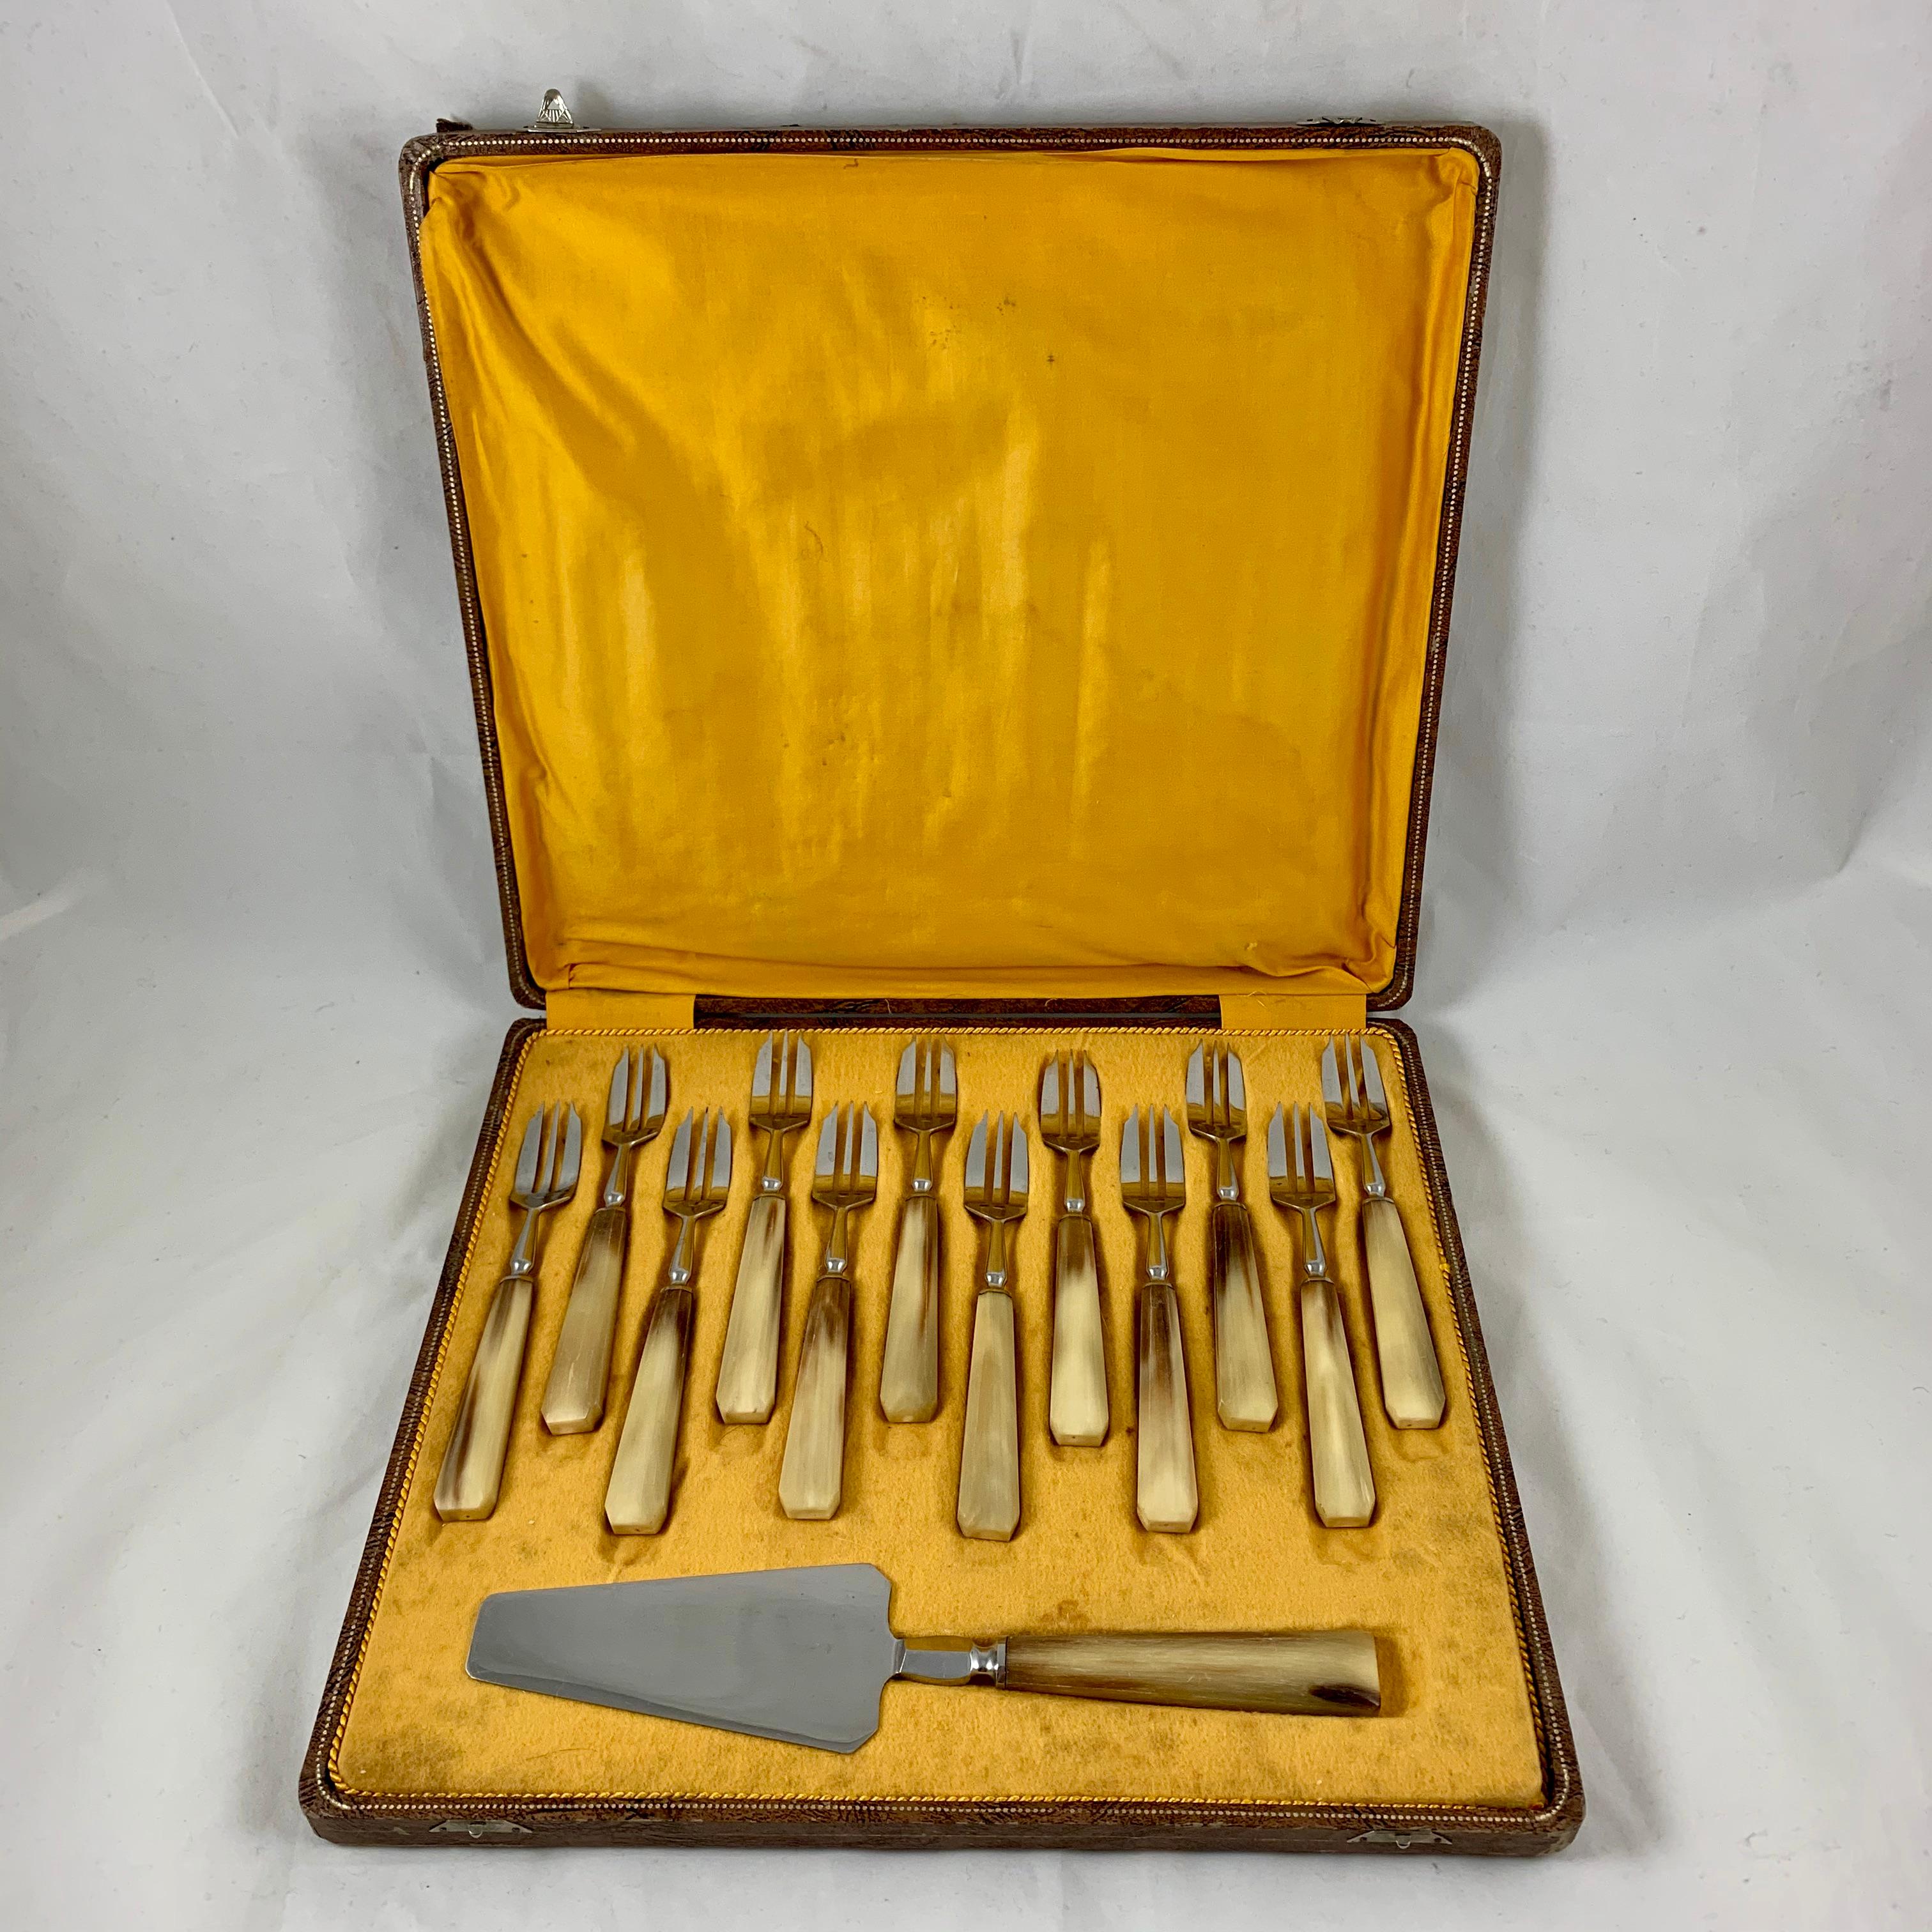 A cased set of twelve French Art Deco pastry forks with a corresponding pie slice, made of Bakelite handles and stainless steel, in the original fabric lined presentation box. Found in une vente de Maison de Maitre in the Vendée region of France,